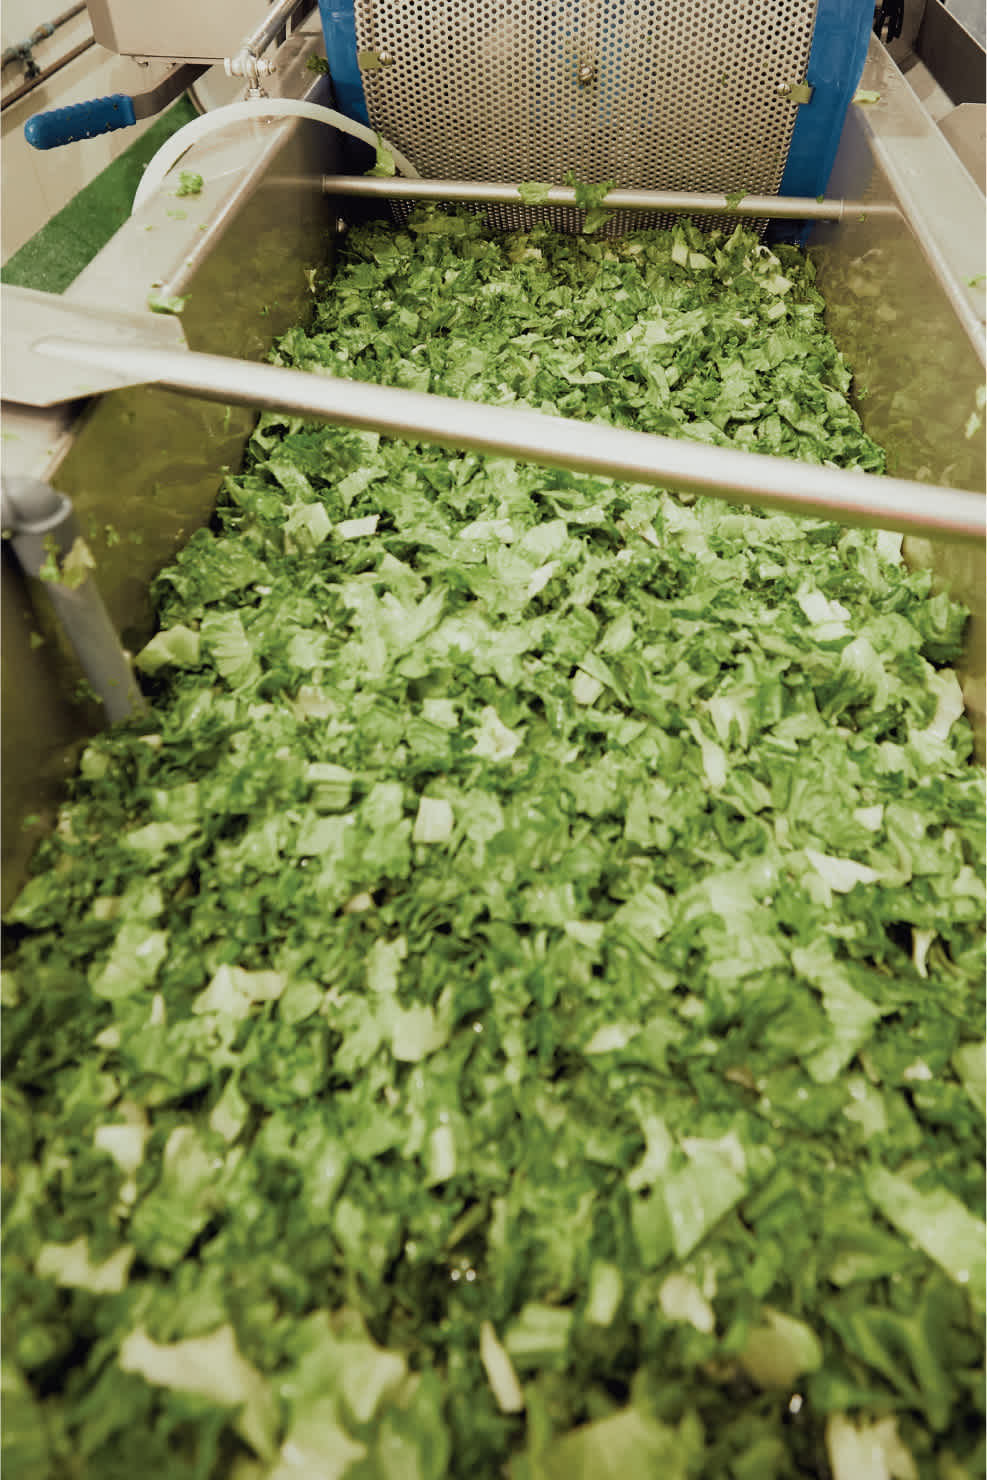 Image of lettuce being chopped and washed